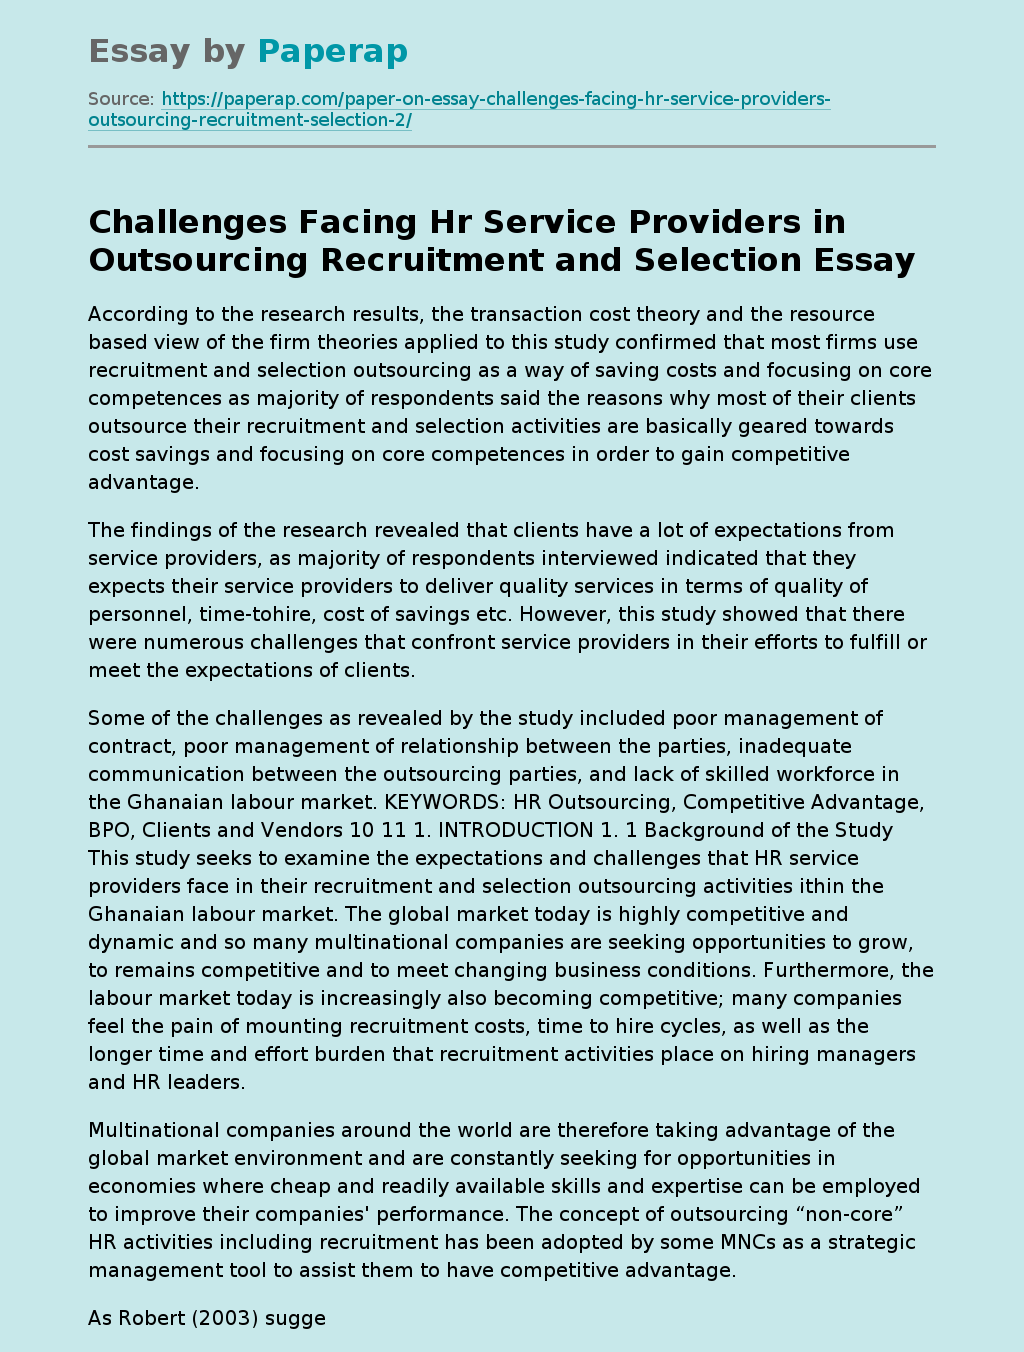 Challenges Facing Hr Service Providers in Outsourcing Recruitment and Selection